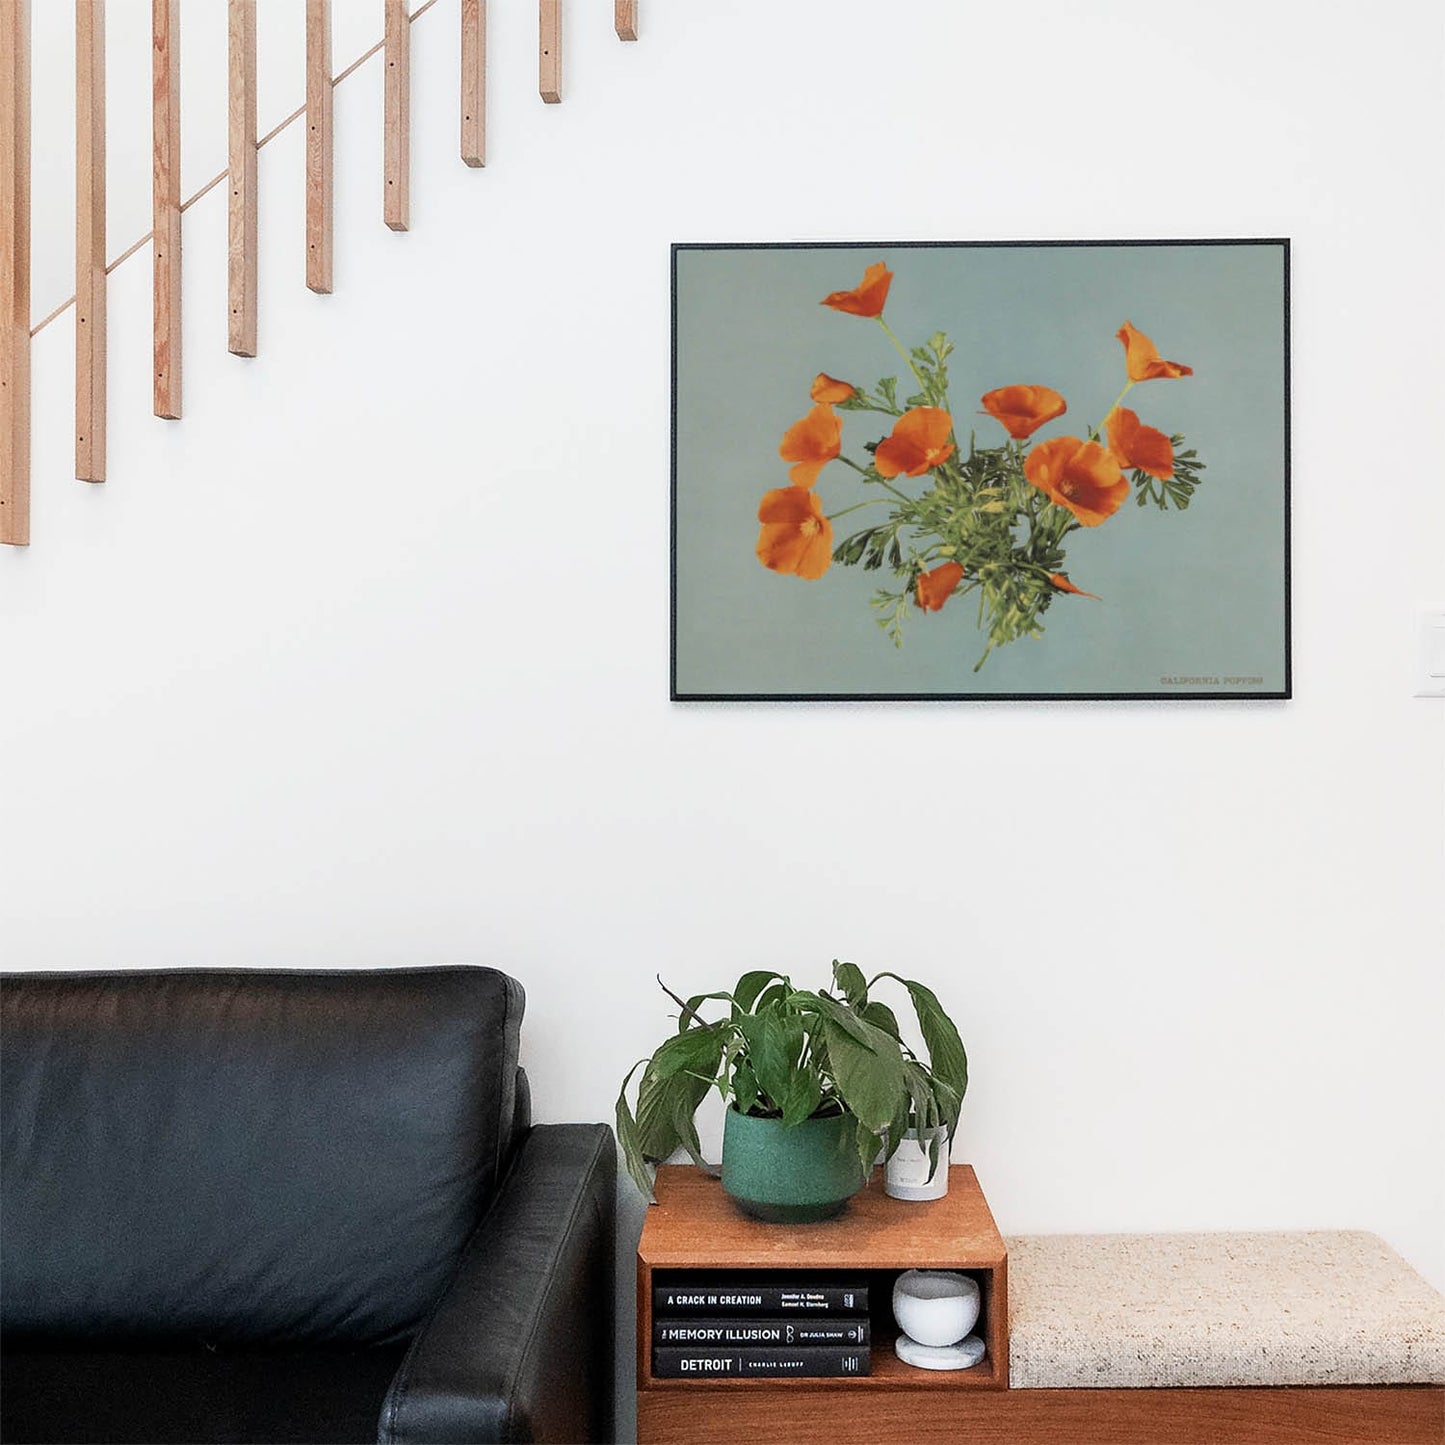 Vintage Floral Wall Art Print in a Picture Frame on Living Room Wall